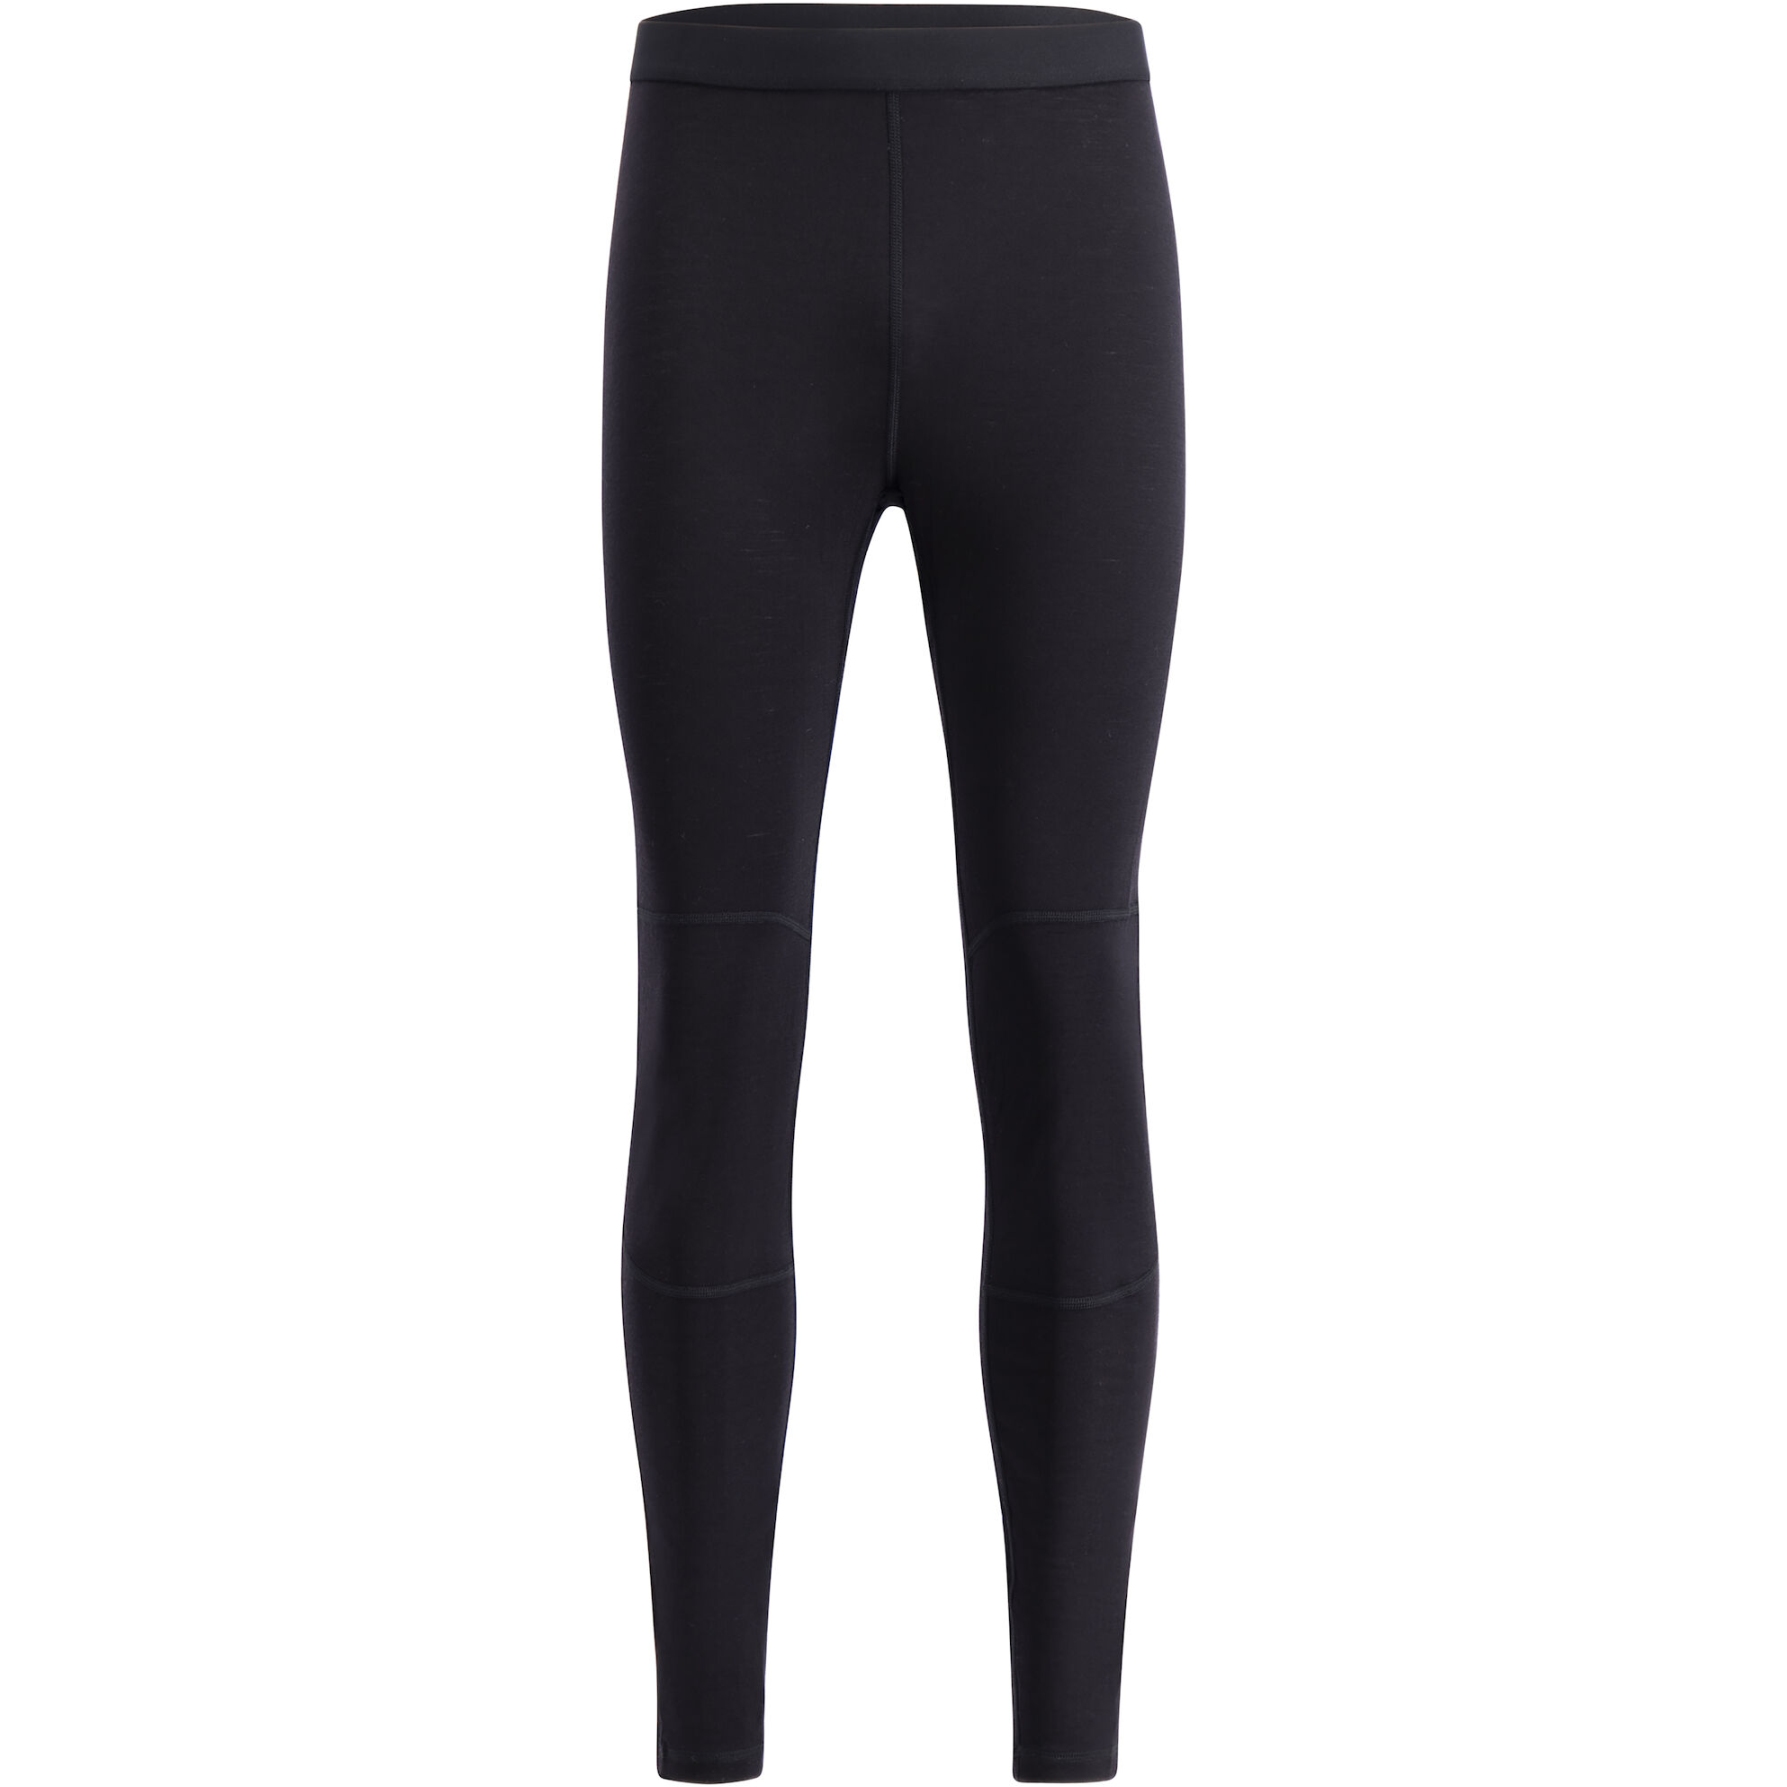 Picture of Lundhags Gimmer Long John Tights Men - Black 900